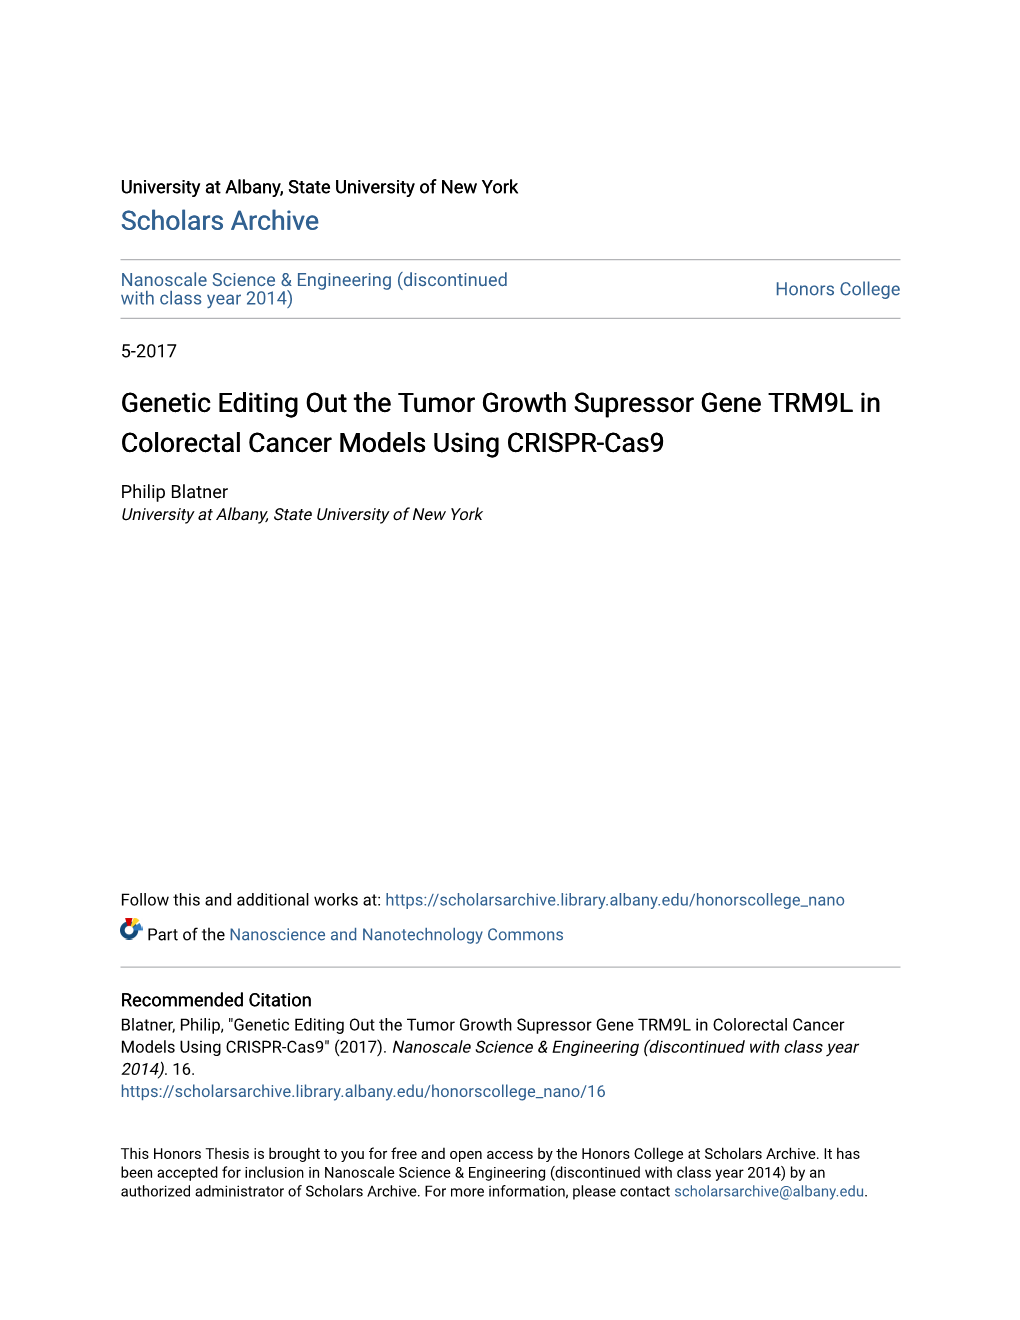 Genetic Editing out the Tumor Growth Supressor Gene TRM9L in Colorectal Cancer Models Using CRISPR-Cas9